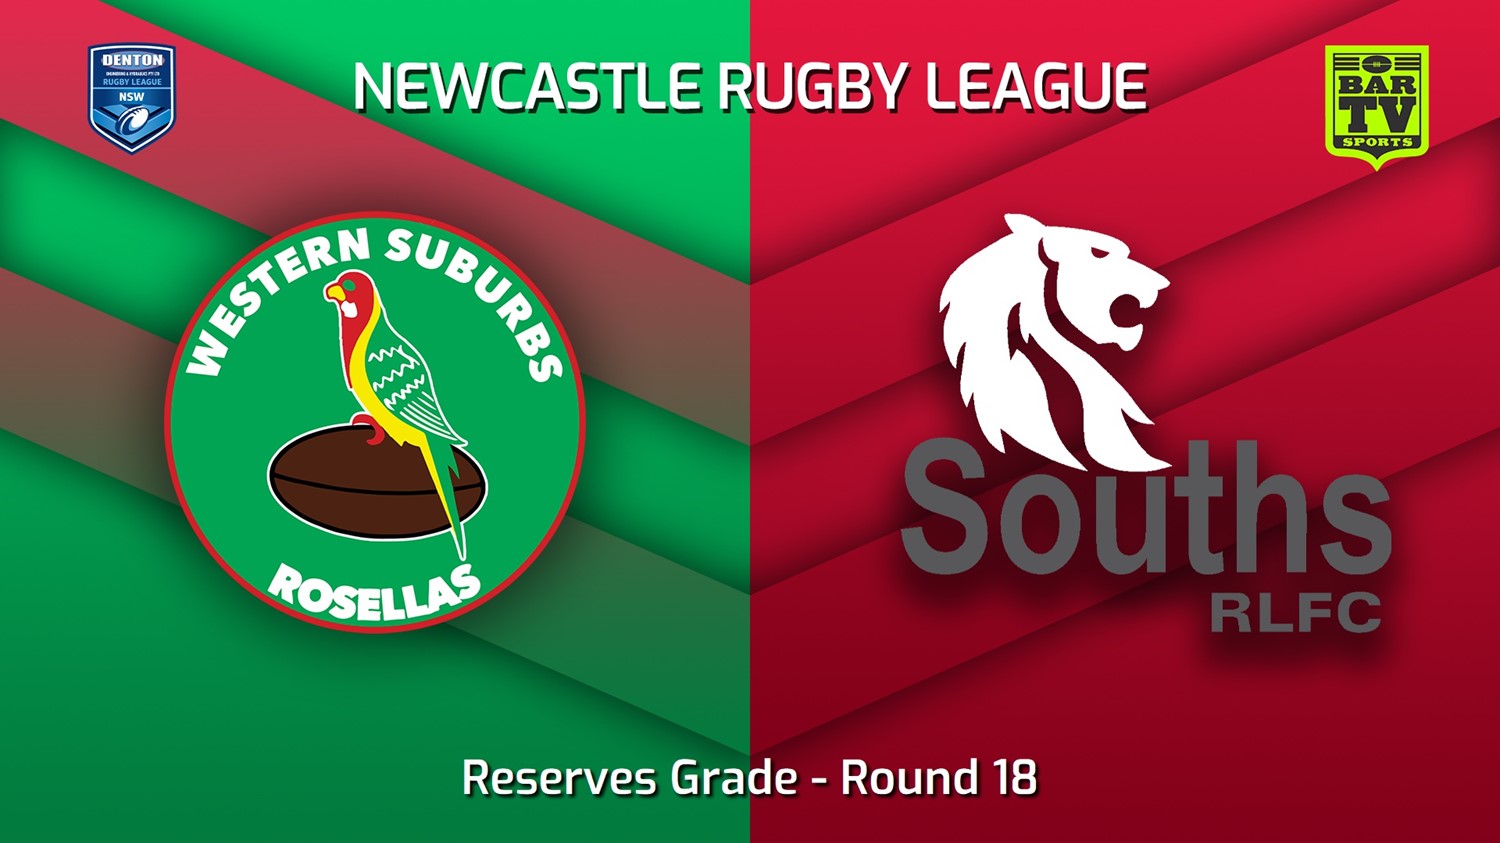 220807-Newcastle Round 18 - Reserves Grade - Western Suburbs Rosellas v South Newcastle Lions Slate Image